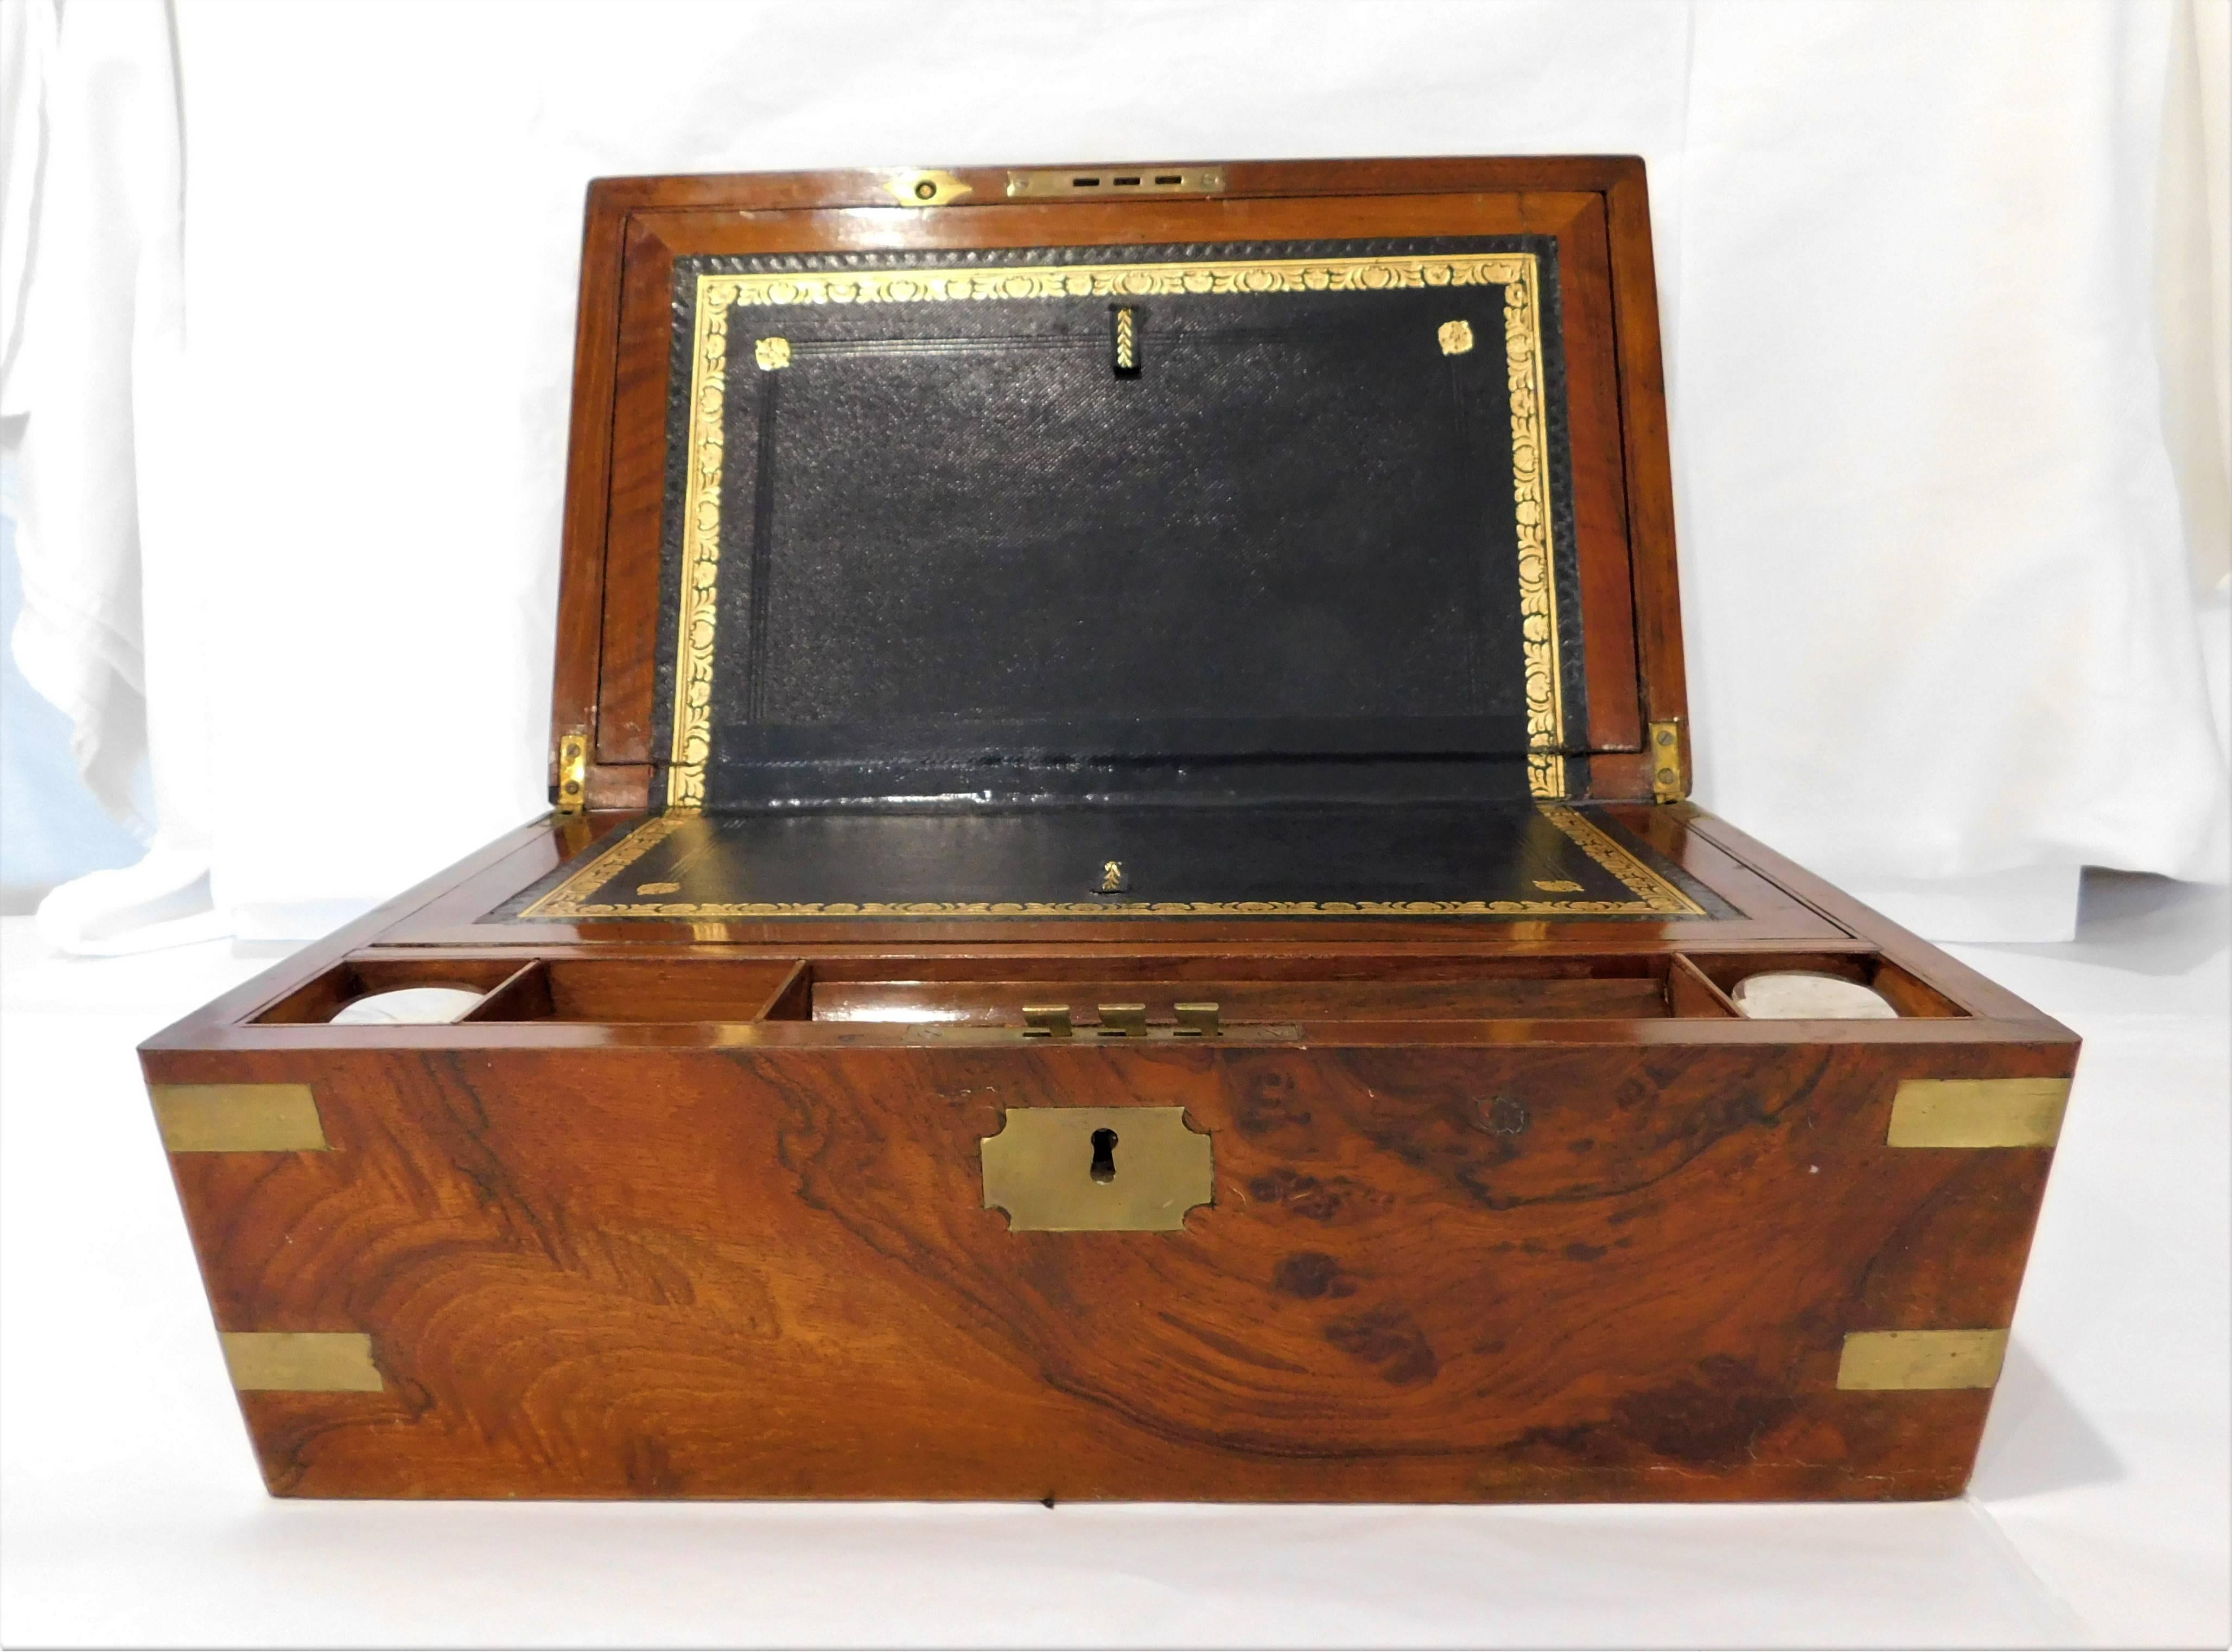 This military style Victorian lap desk writing slope has multiple internal compartments including a secret drawer! Also two glass ink wells. It is made with walnut with brass accents.

Writing slope
As an antique the lap desk is a smaller variant